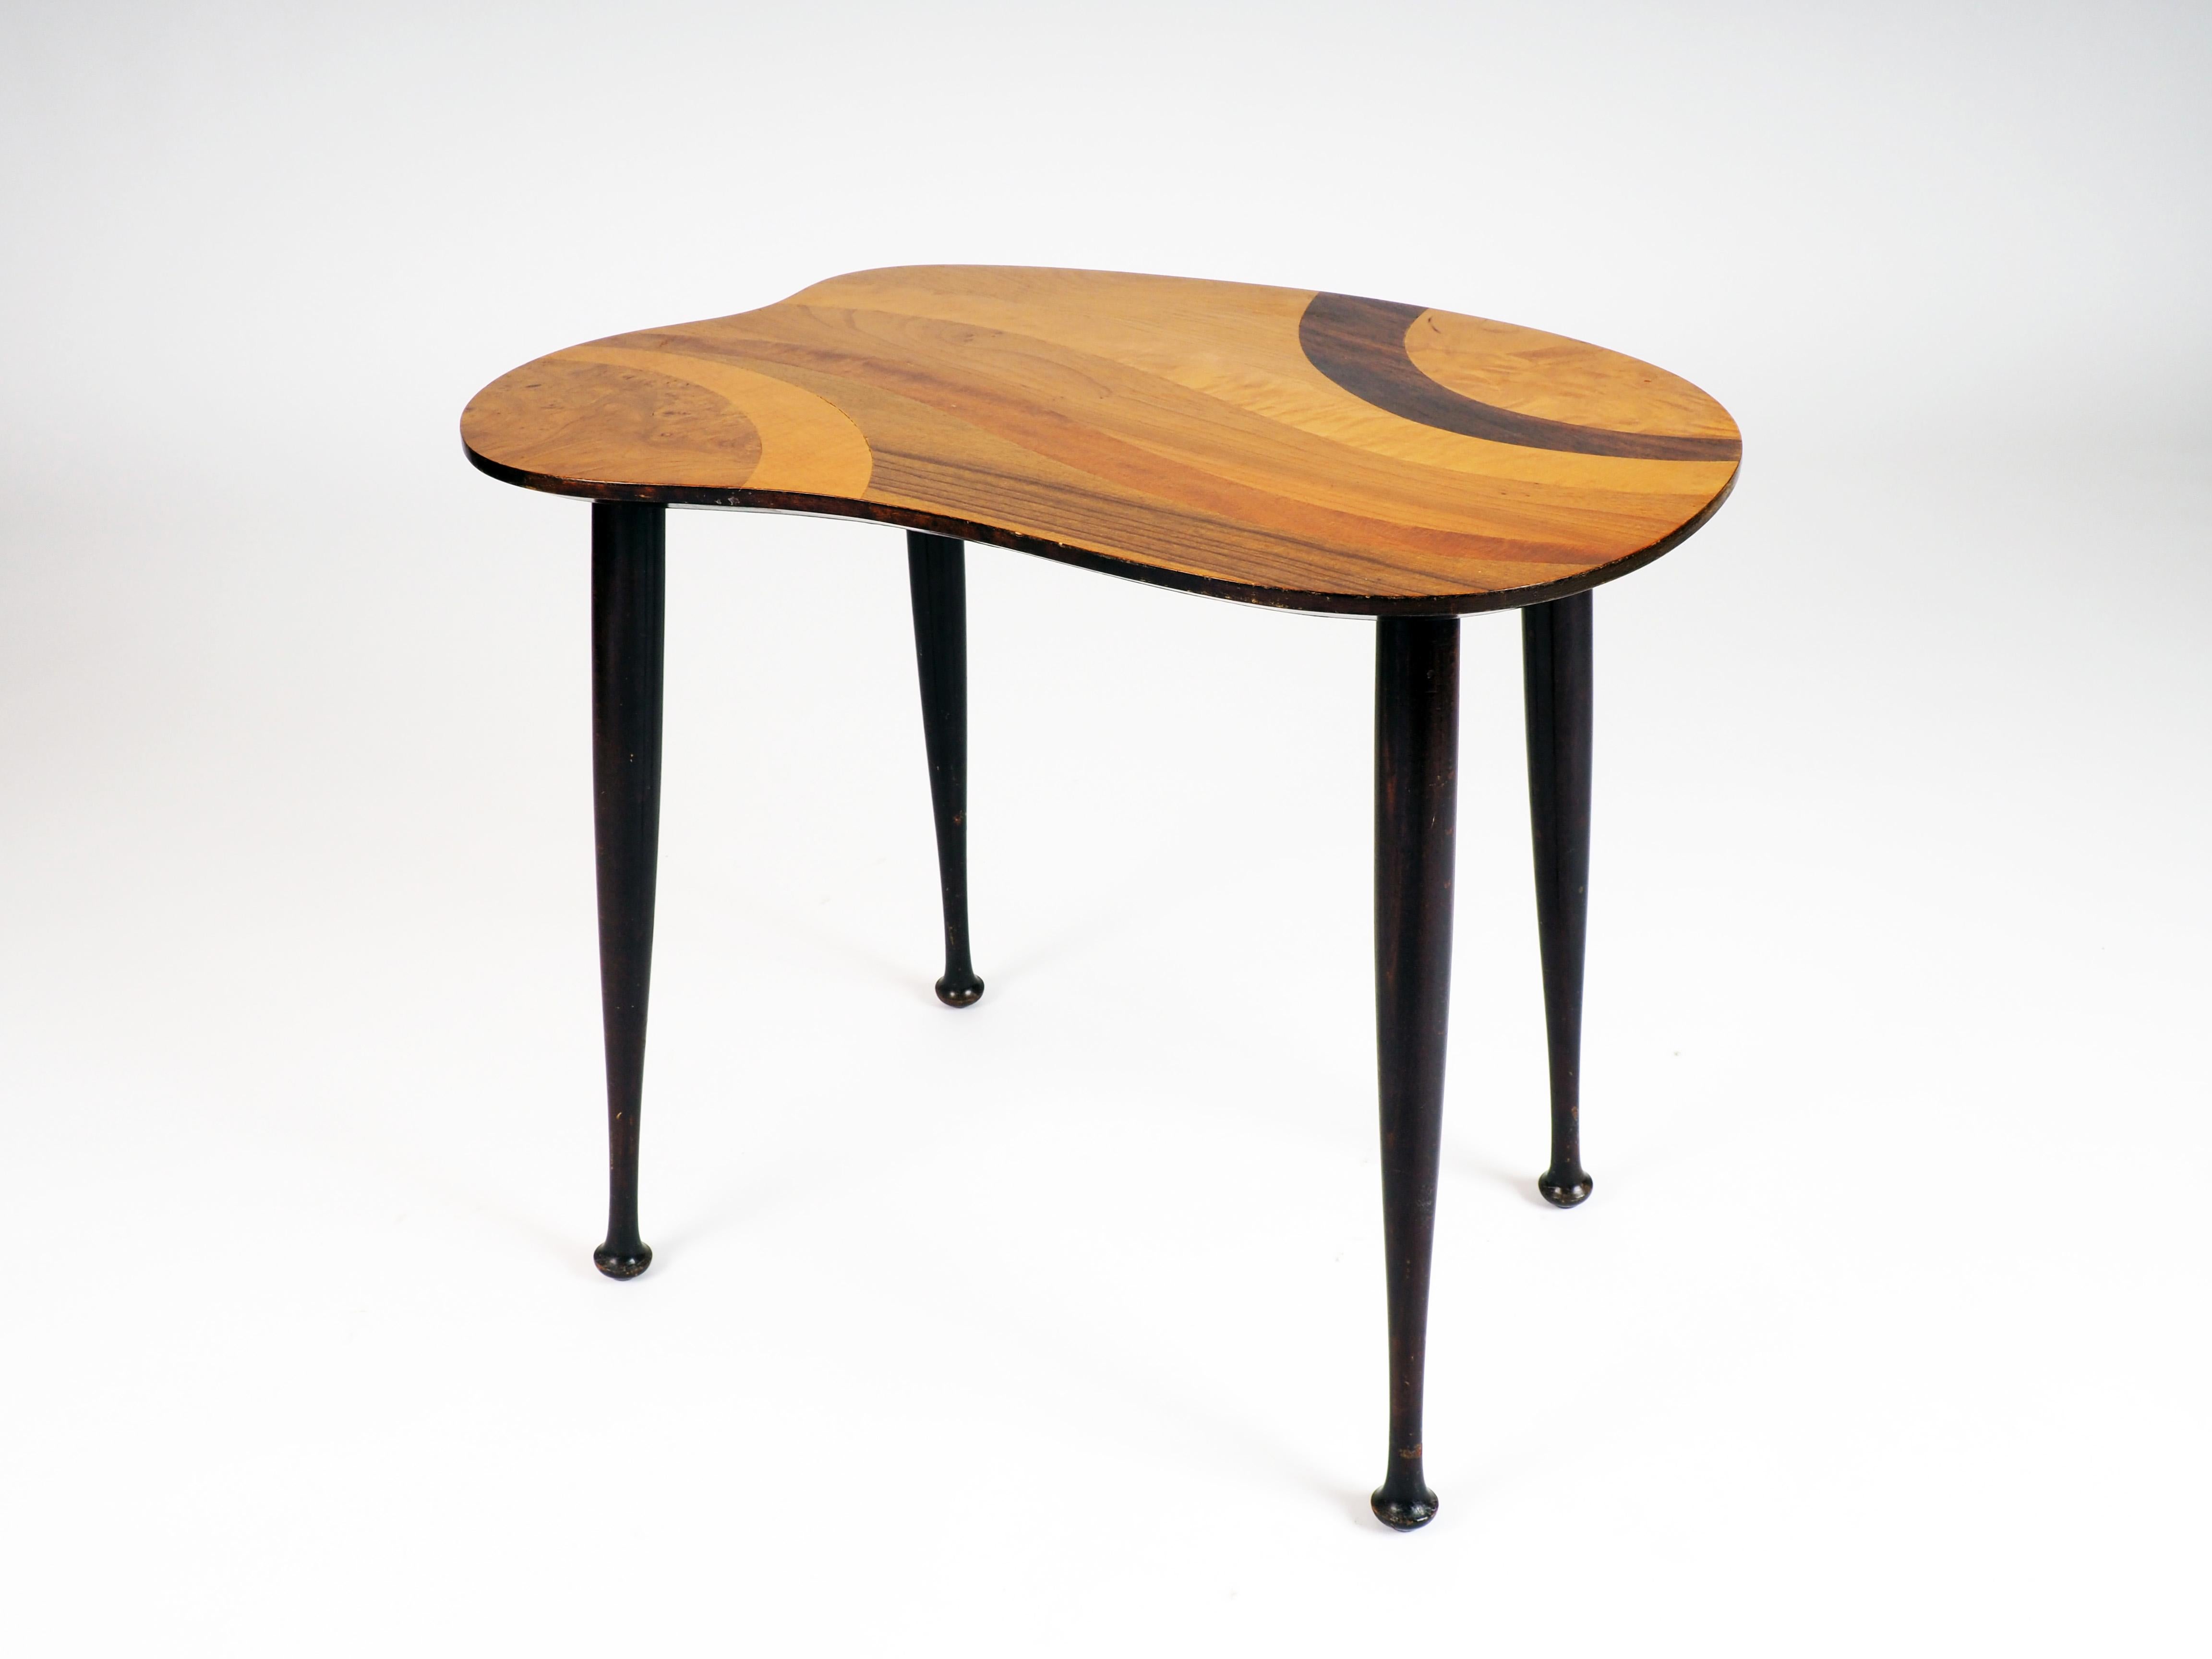 Side table with inlaid wood top. Made in Sweden during the 1950s.